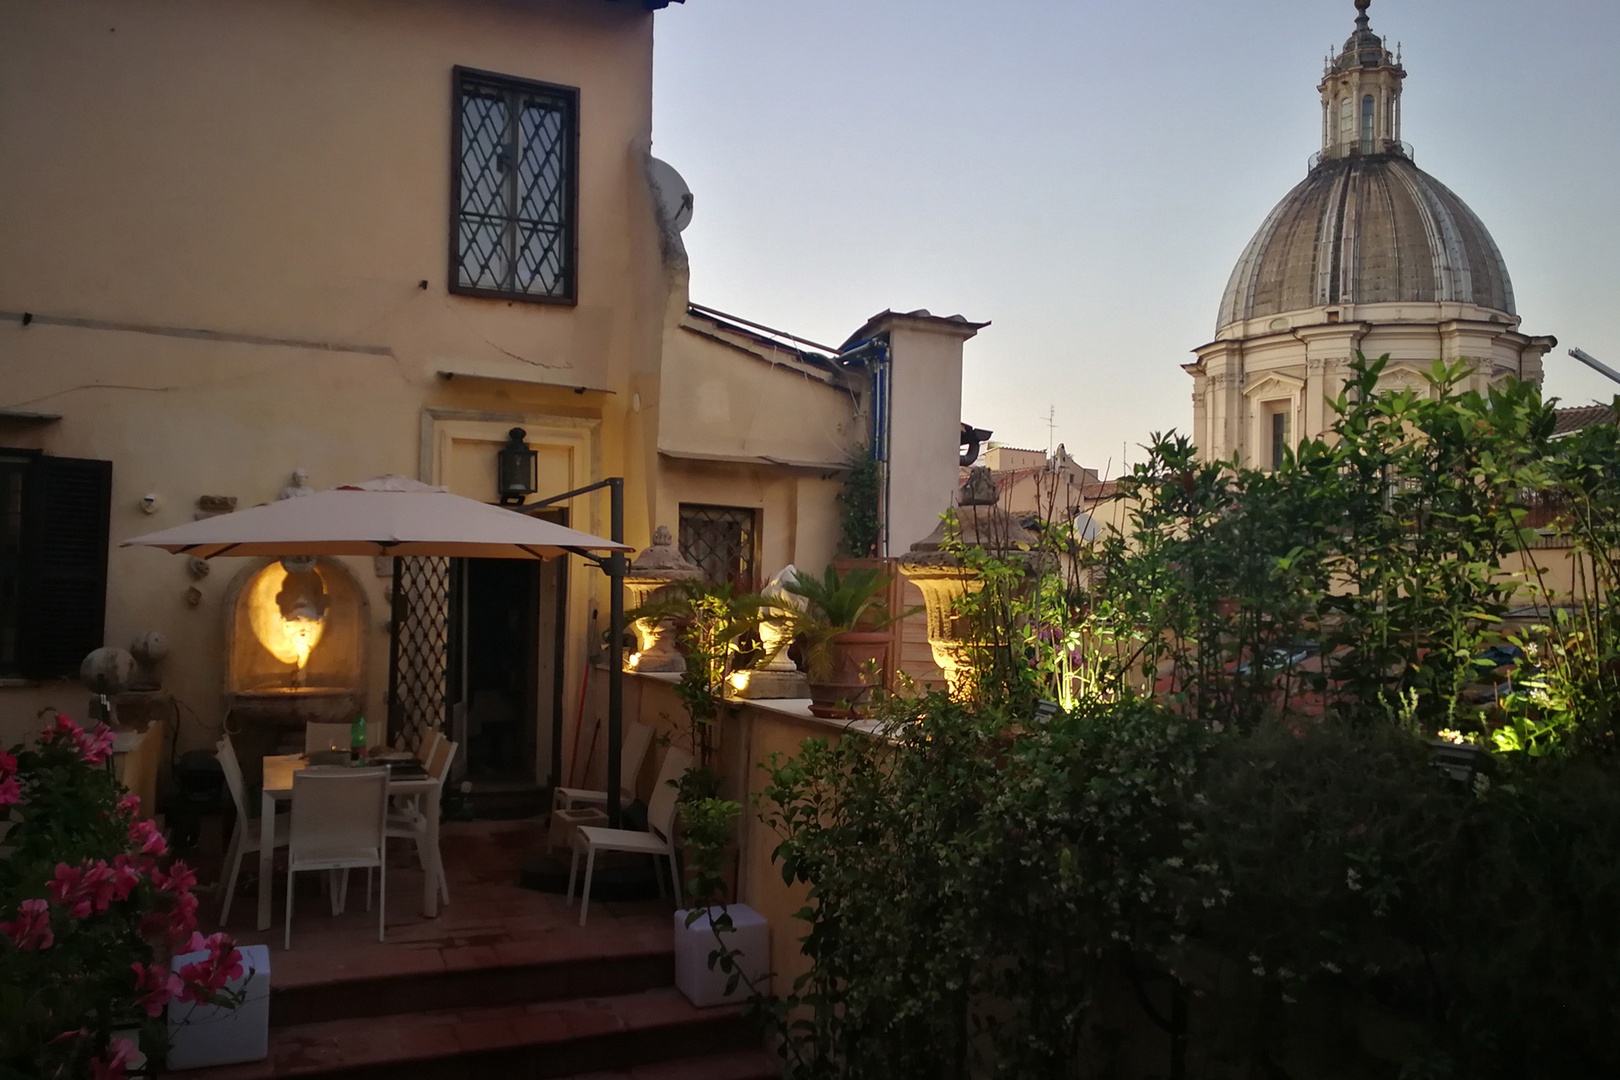 Spacious terrace overlooks the cupola of the famous  Sant’Agnese in Agone, the beautiful church in Piazza Navona